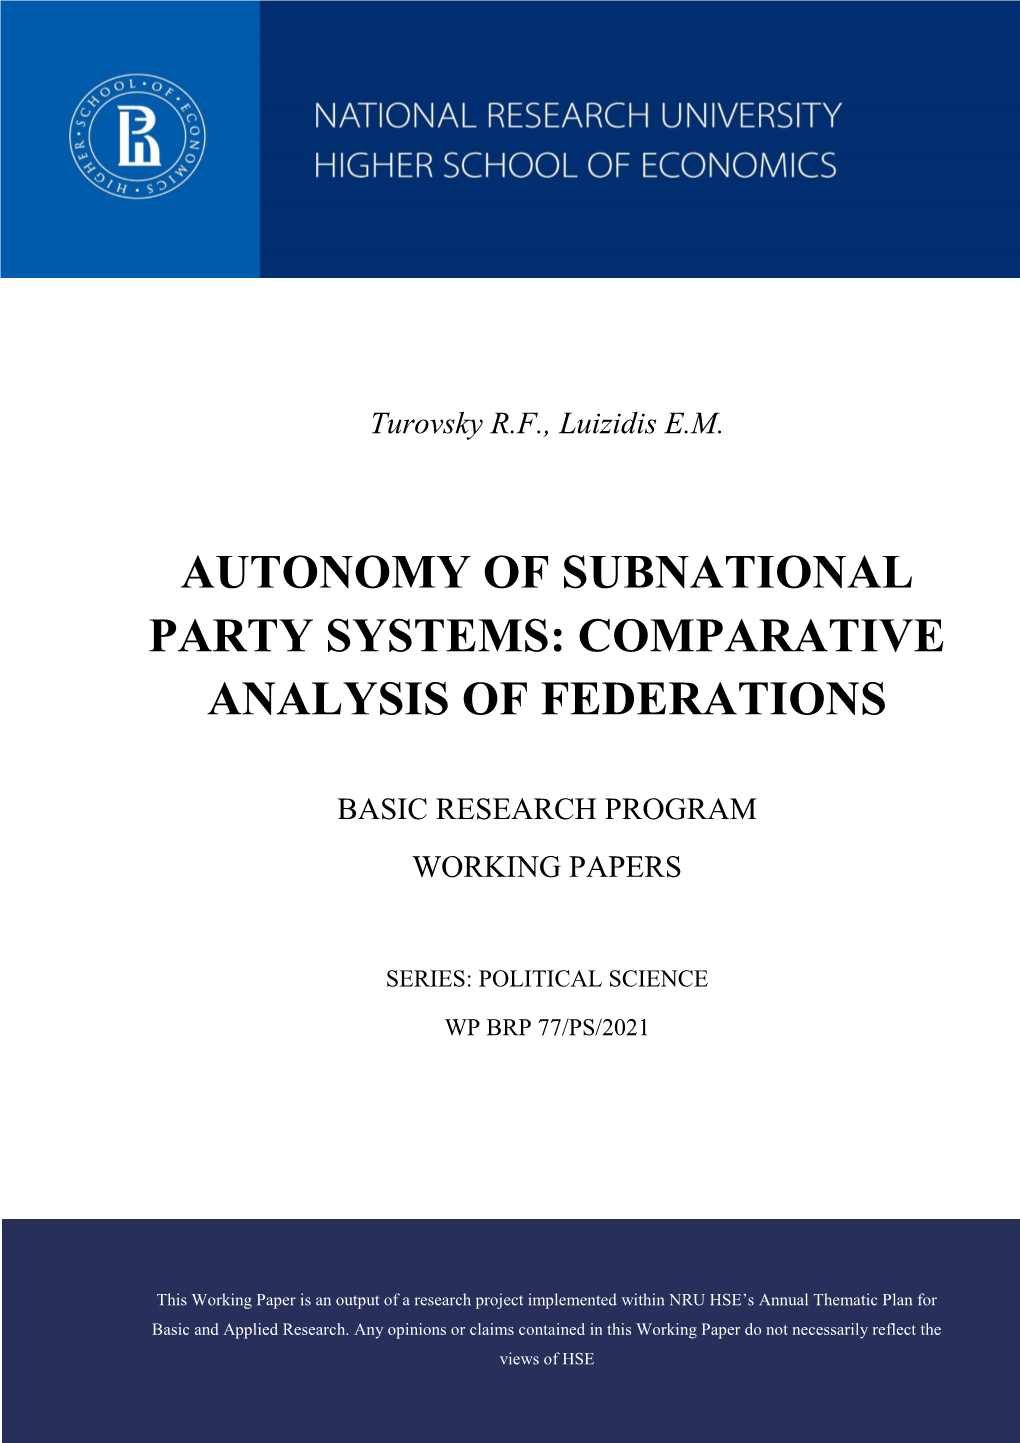 "Autonomy of Subnational Party Systems: Comparative Analysis Of